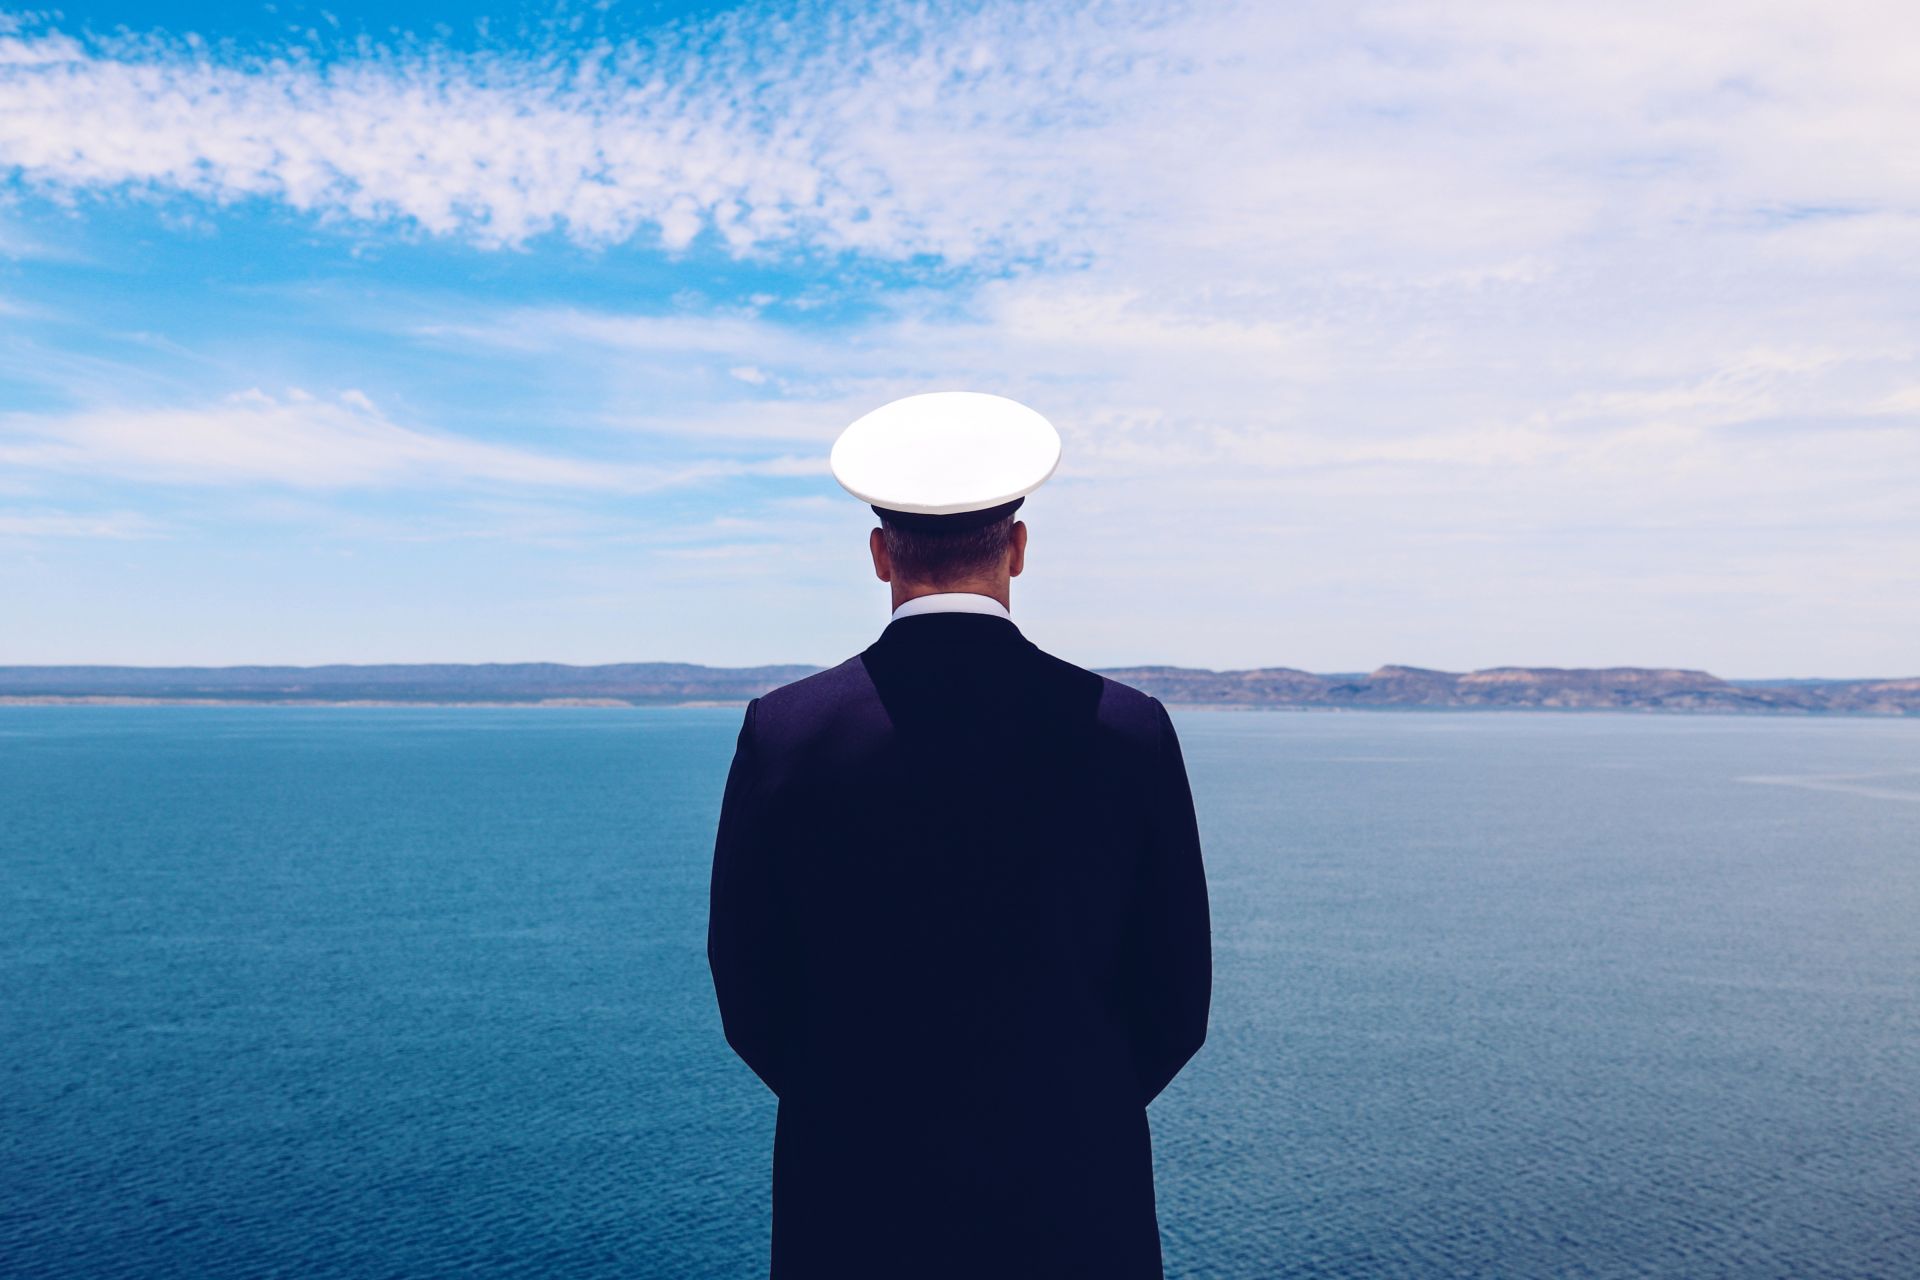 Rear view of a ship's officer in a navy blue uniform and white cap looking out over the calm blue sea, symbolizing leadership and vigilance at sea.